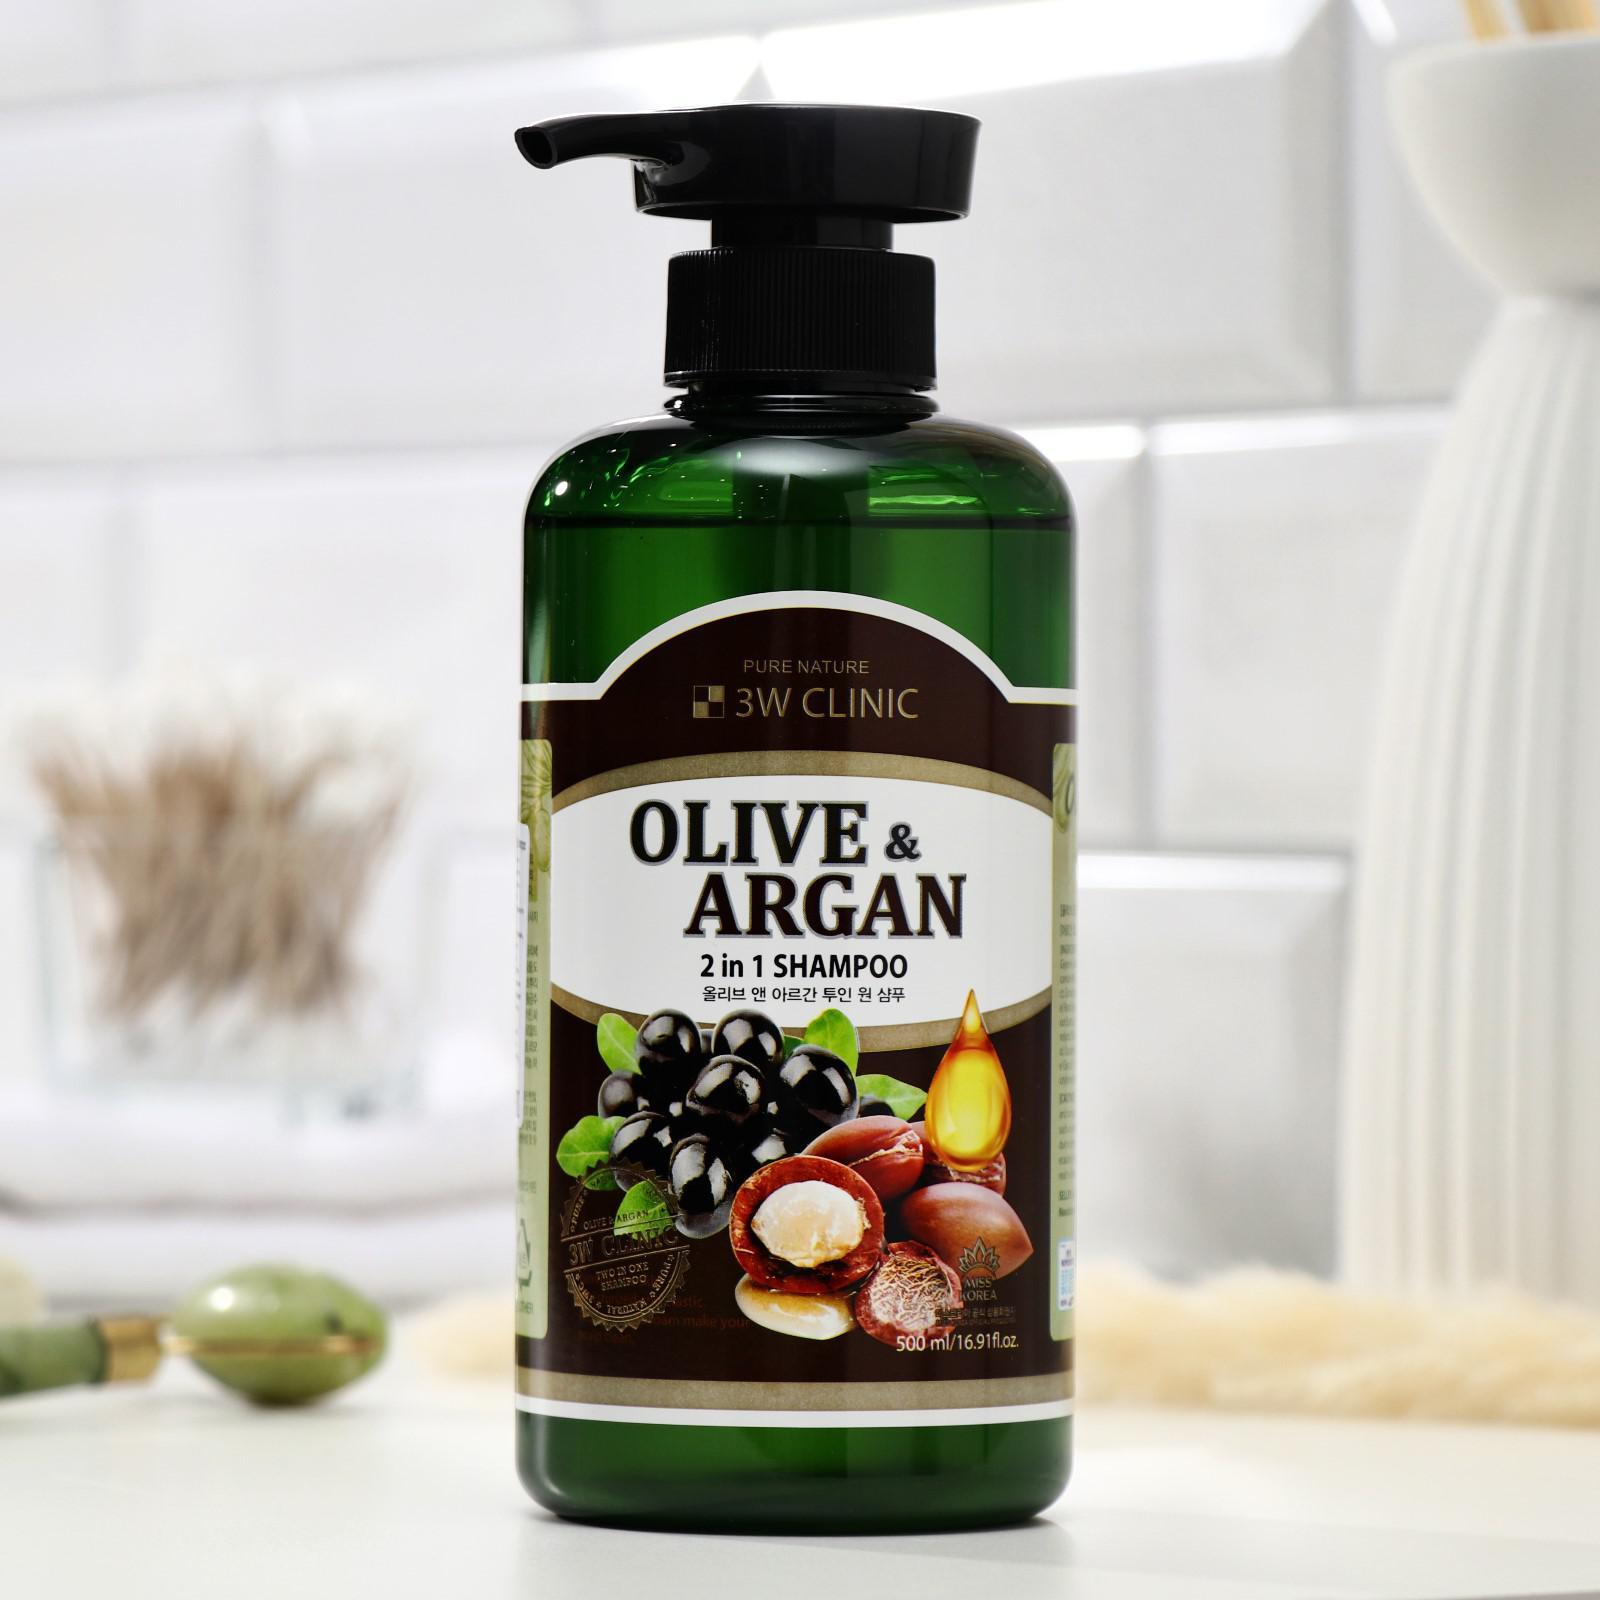 3w clinic olive and argan 2 IN 1 shampoo – 500ml